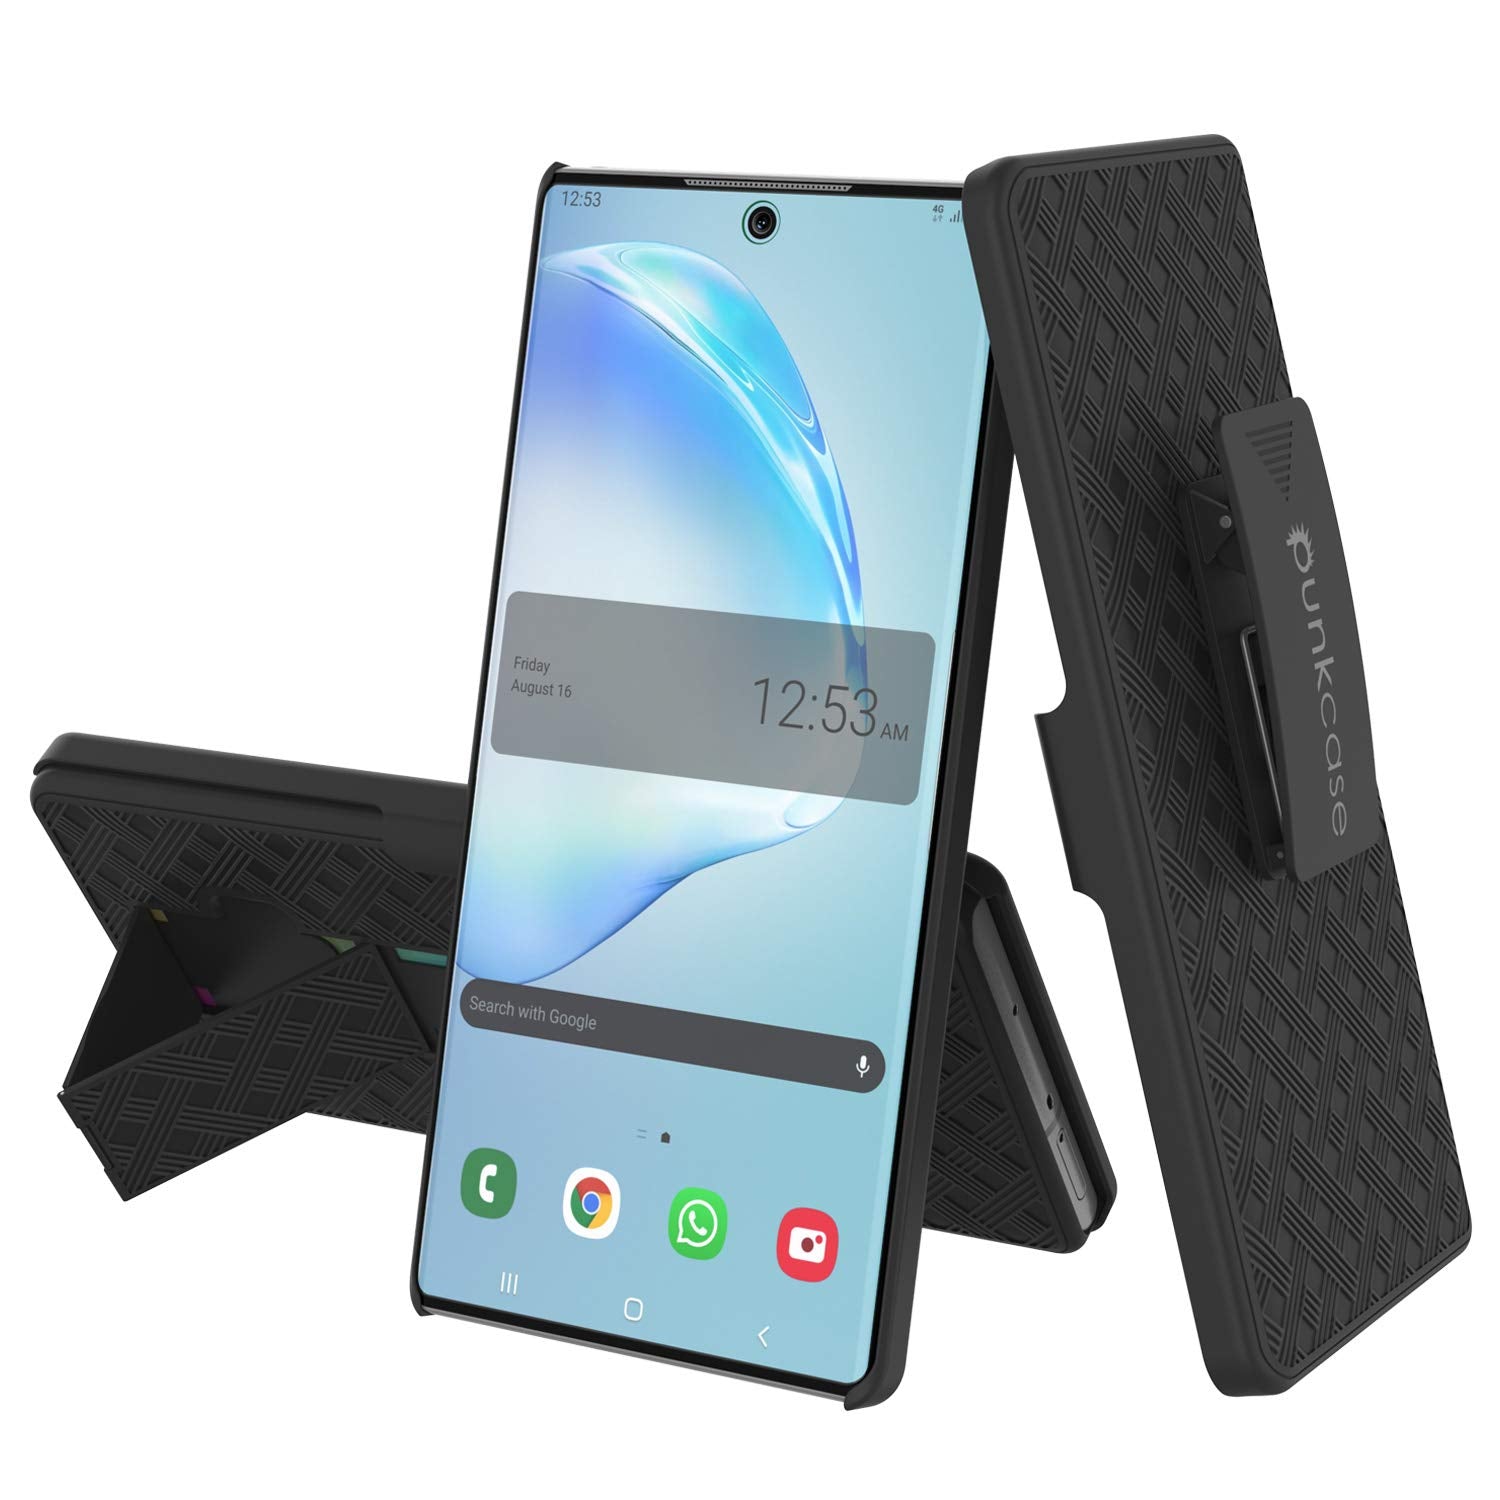 PunkCase Galaxy Note 10+ Plus Case with Screen Protector, Holster Belt Clip & Built-in Kickstand [Black]